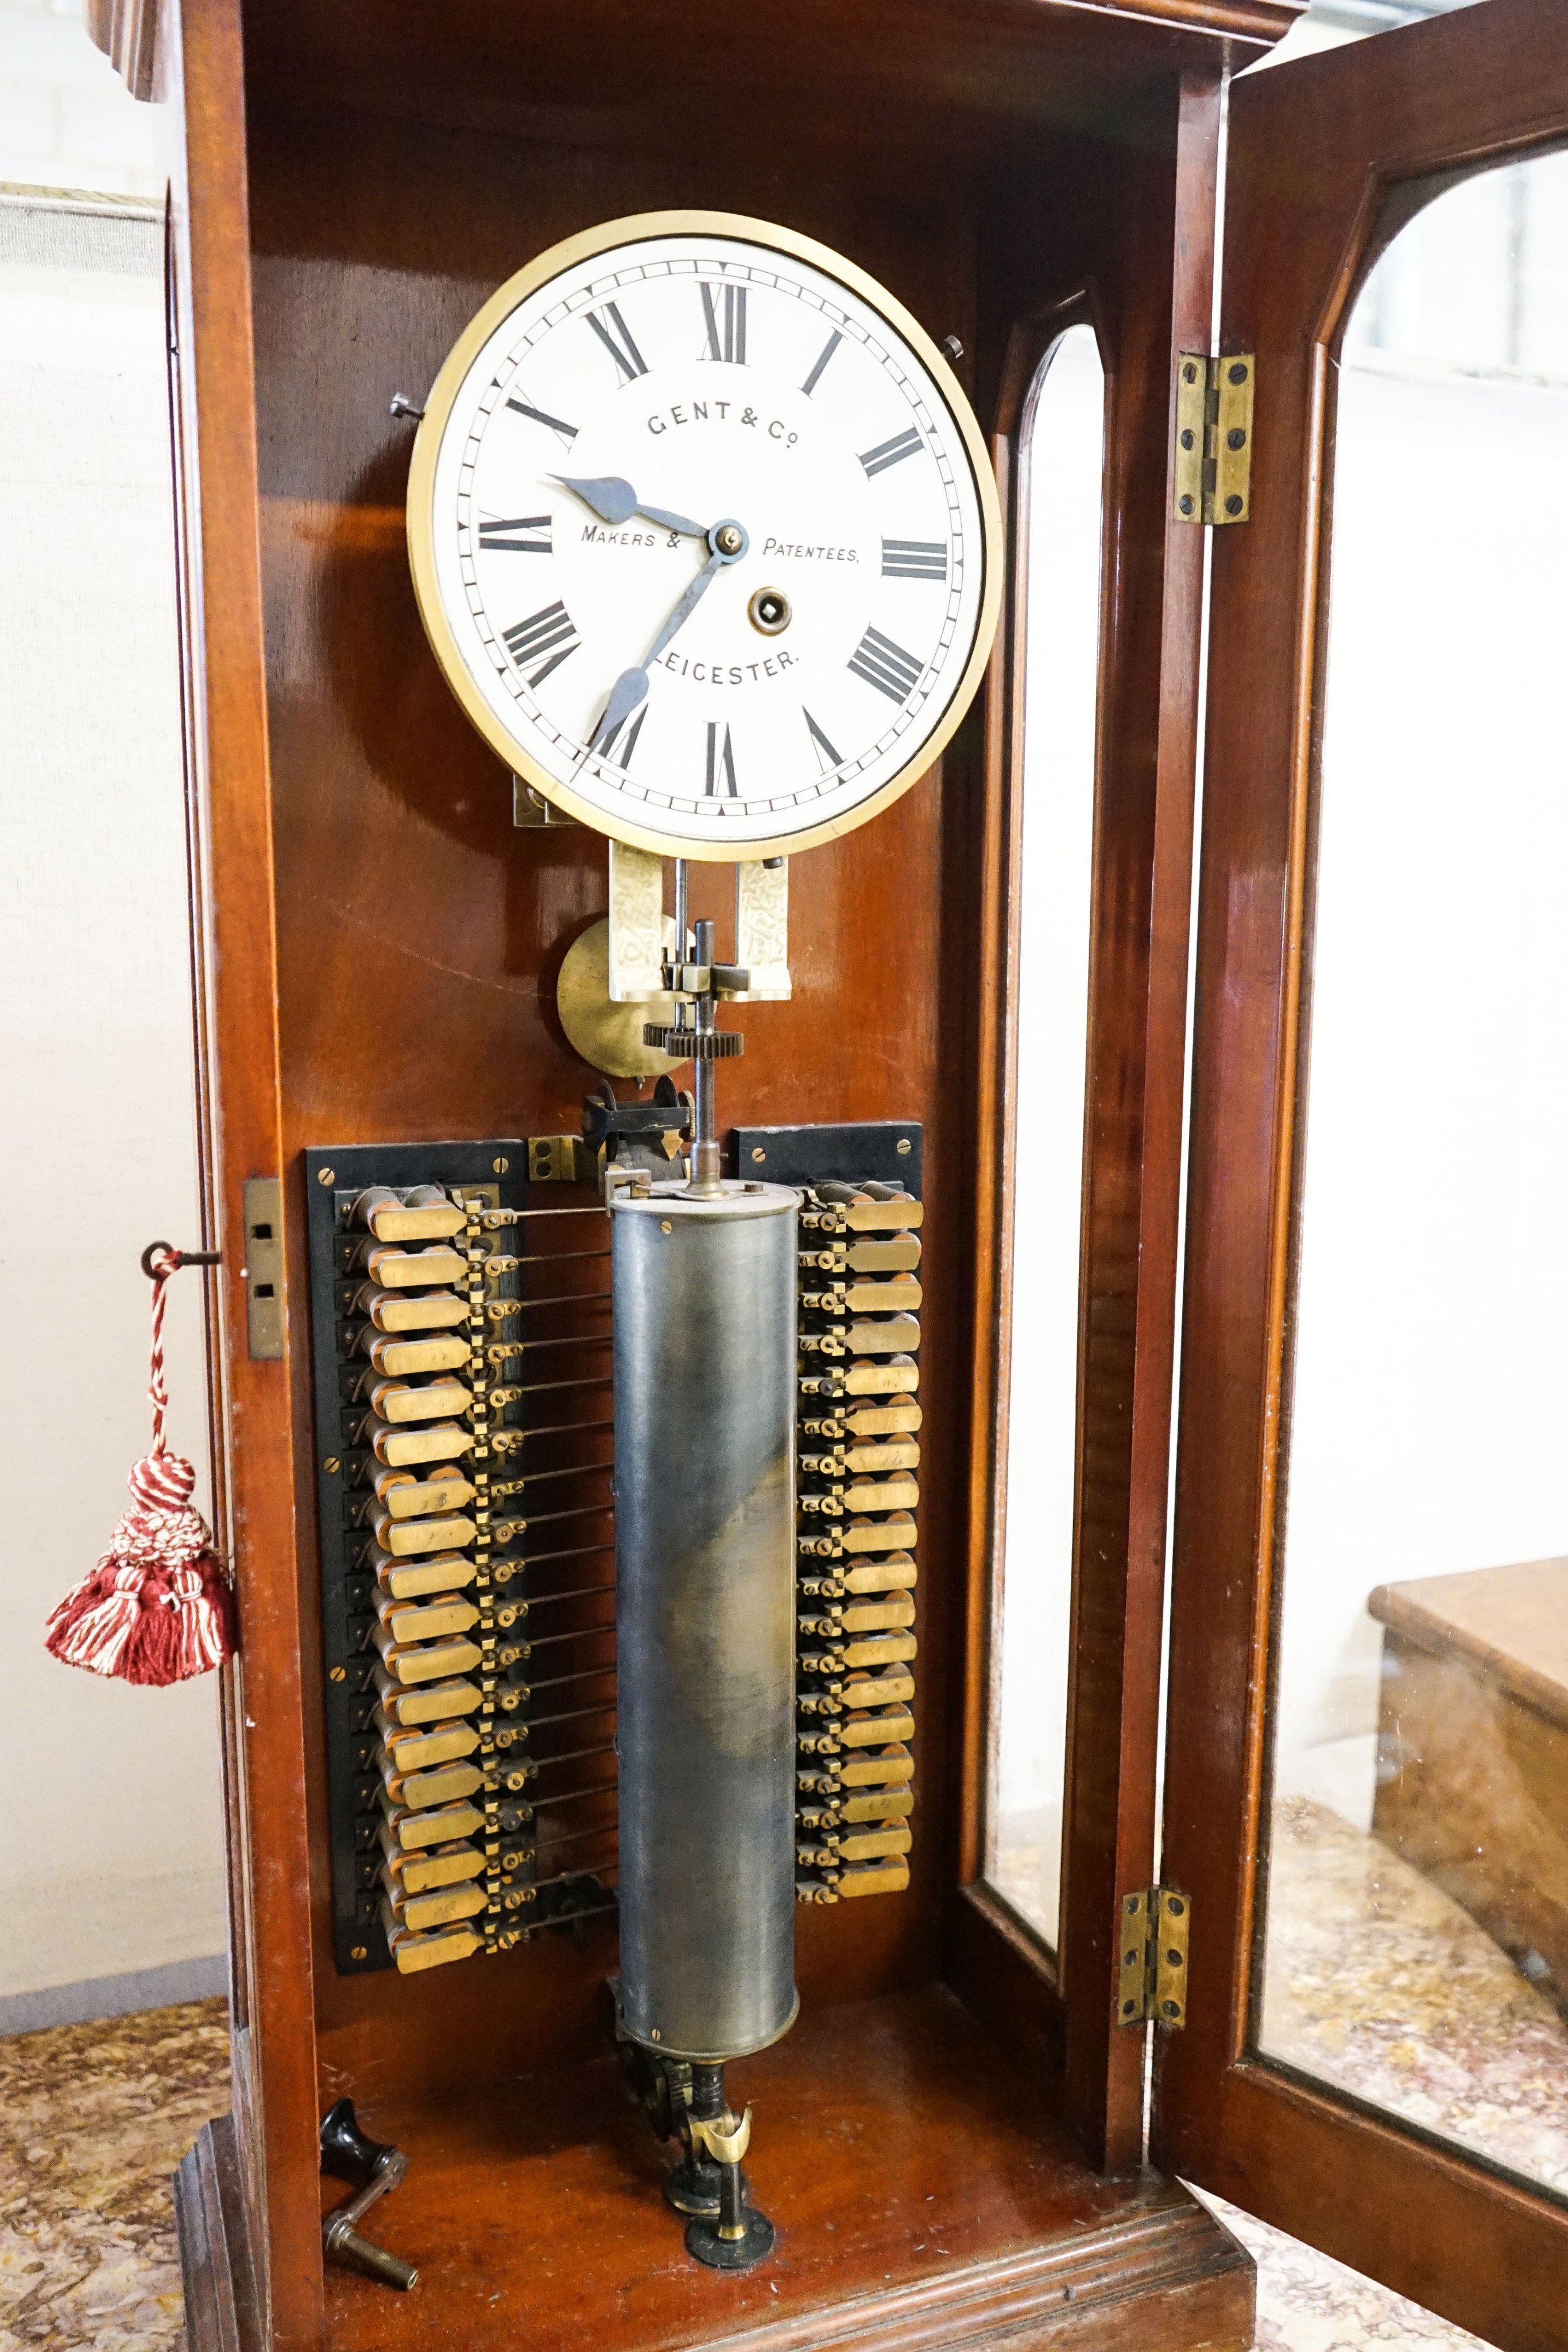 A Gent & Co. Ltd. Patent electric watchman's or 'telltale' clock, single cylinder mahogany cased, height 101cm